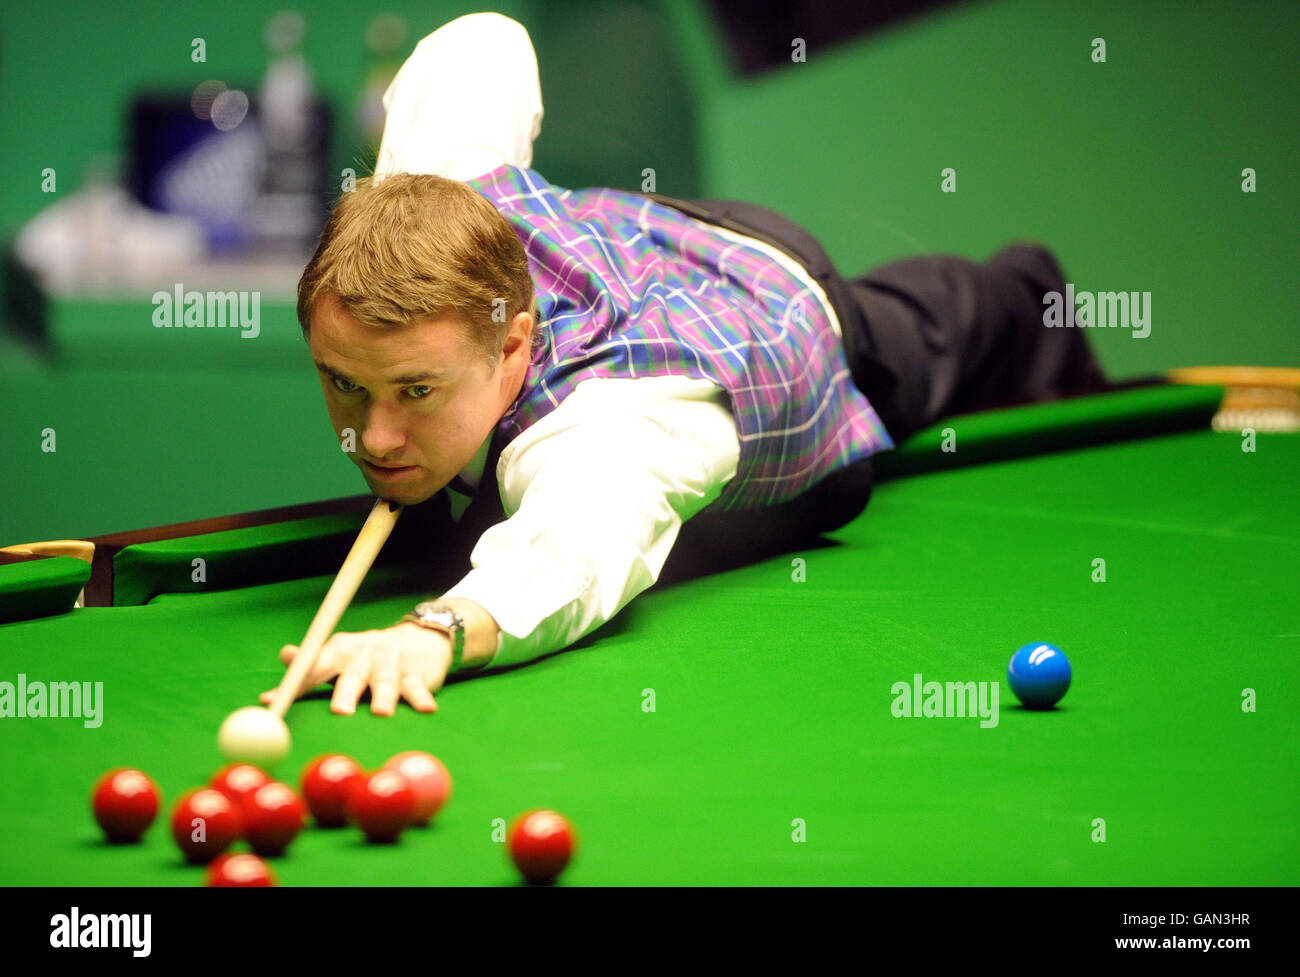 Stephen Hendry at the table during his semi final match during the 888 World Snooker Championship at the Crucible Theatre, Sheffield Stock Photo